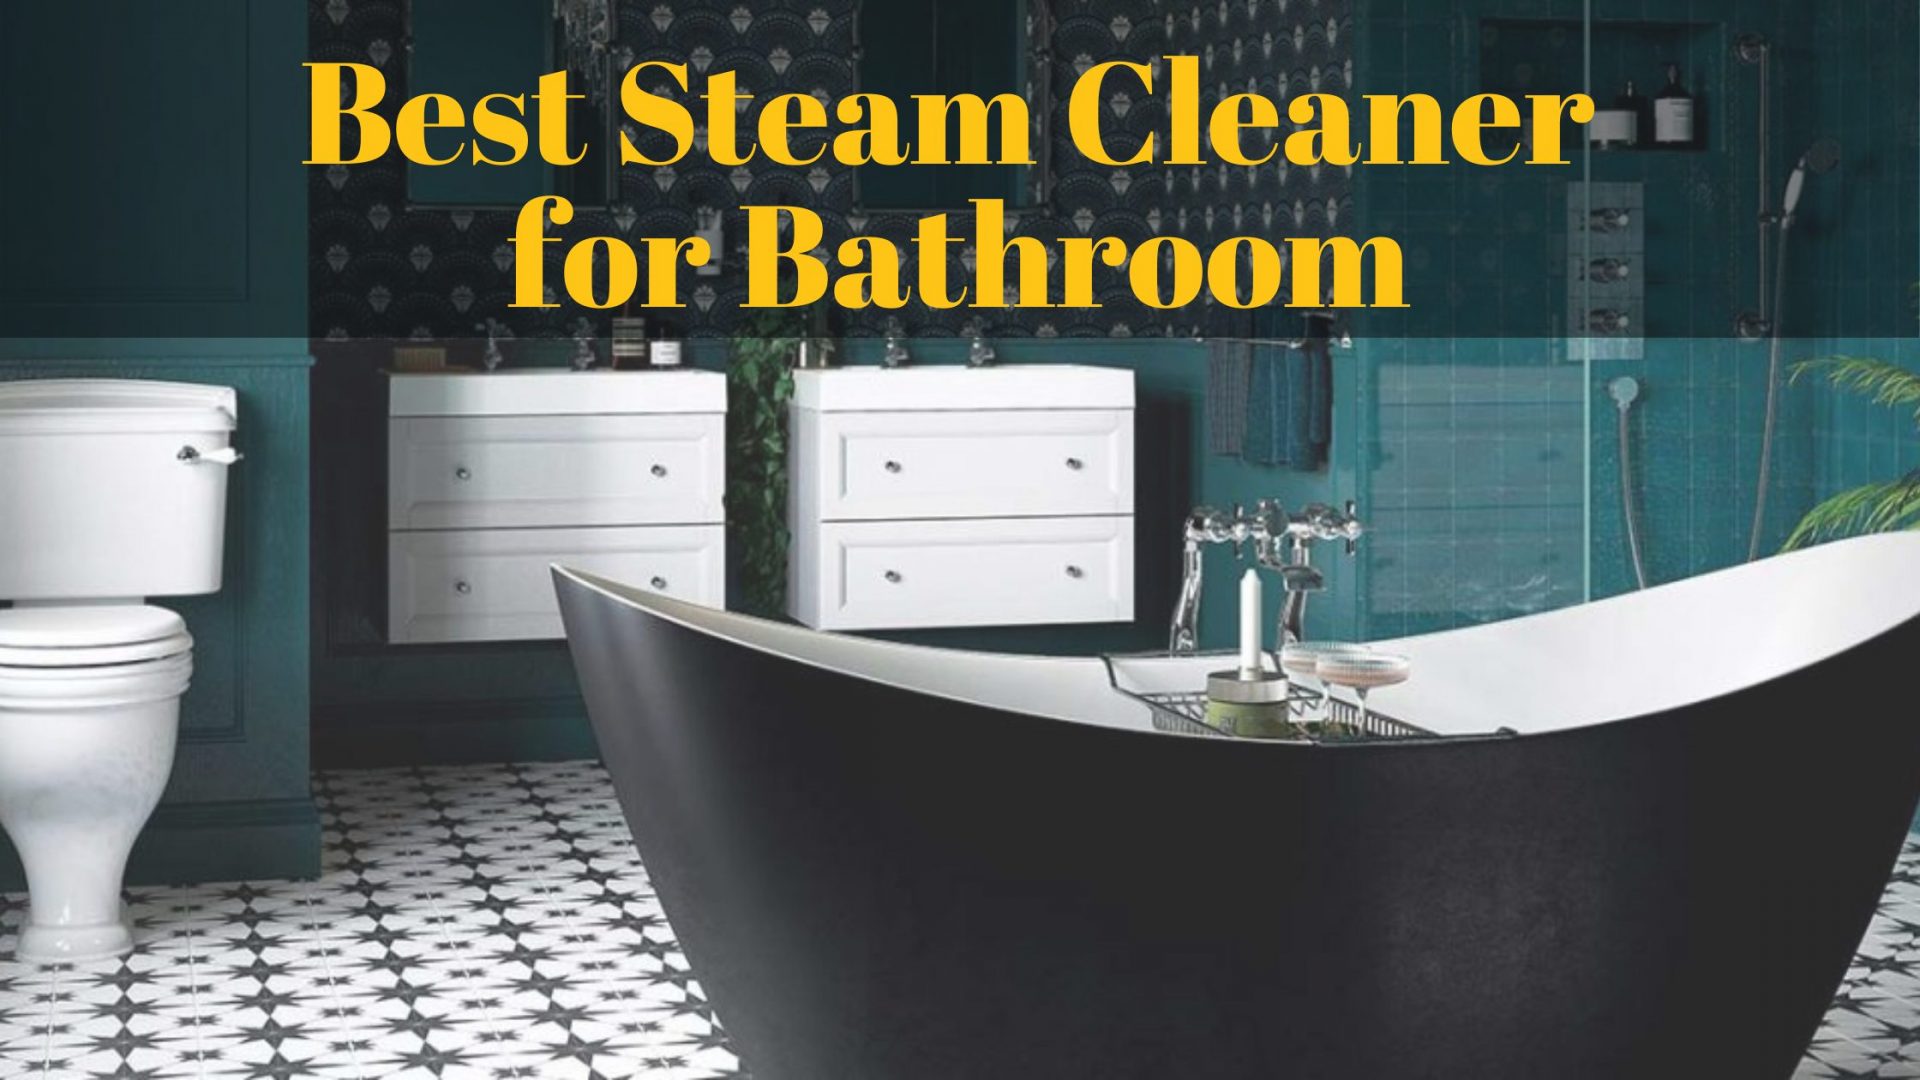 Best Steam Cleaner for Bathroom